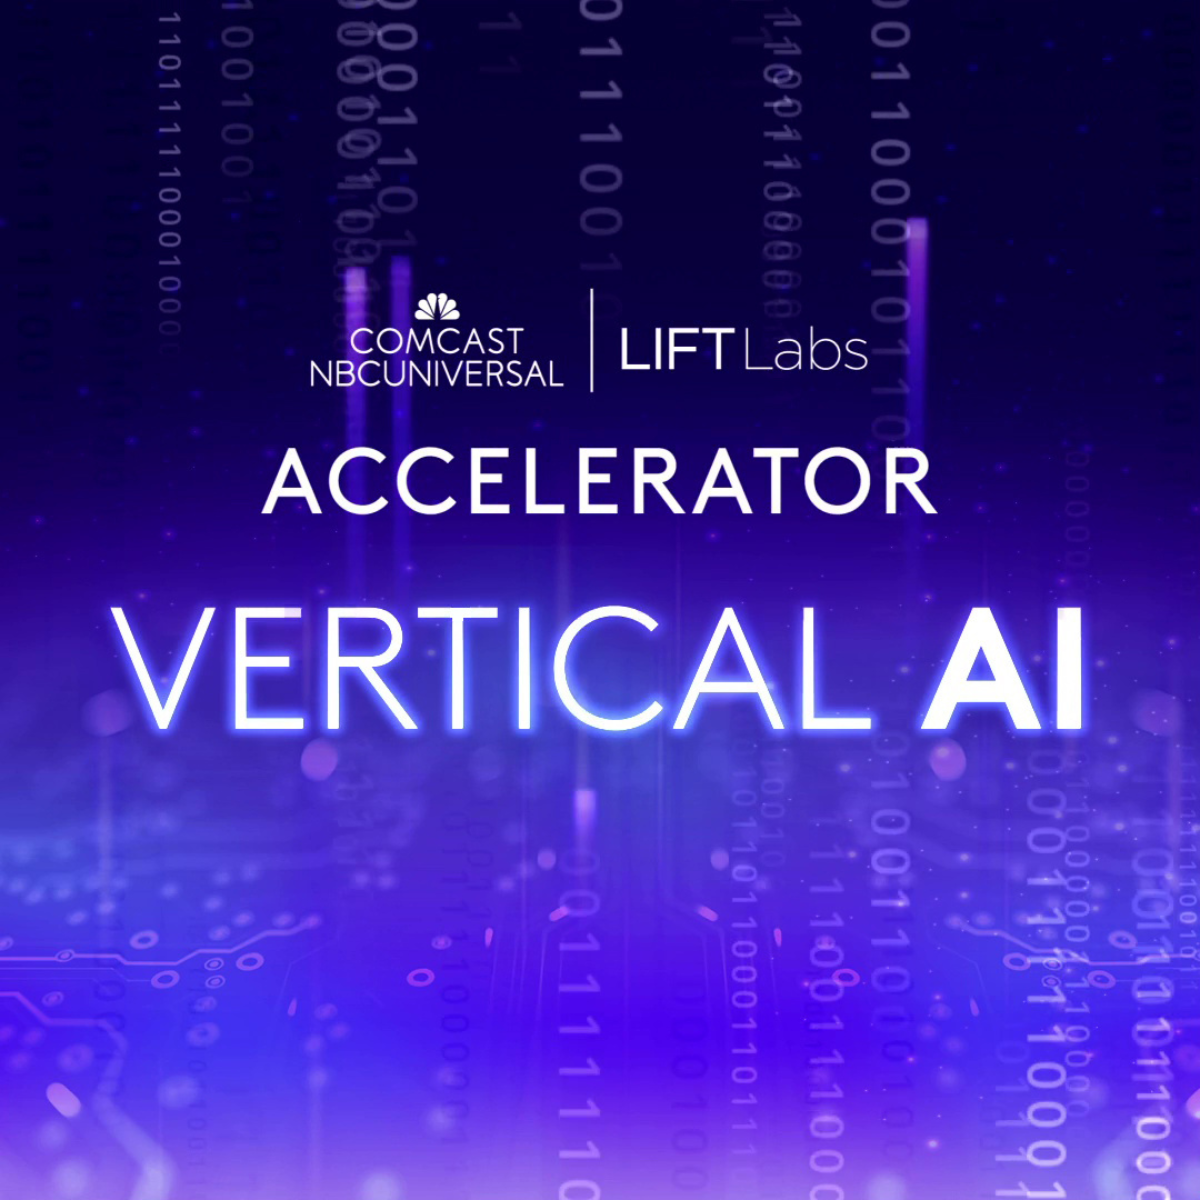 Meet the nine startups selected for the Comcast NBCUniversal LIFT Labs Vertical AI Accelerator